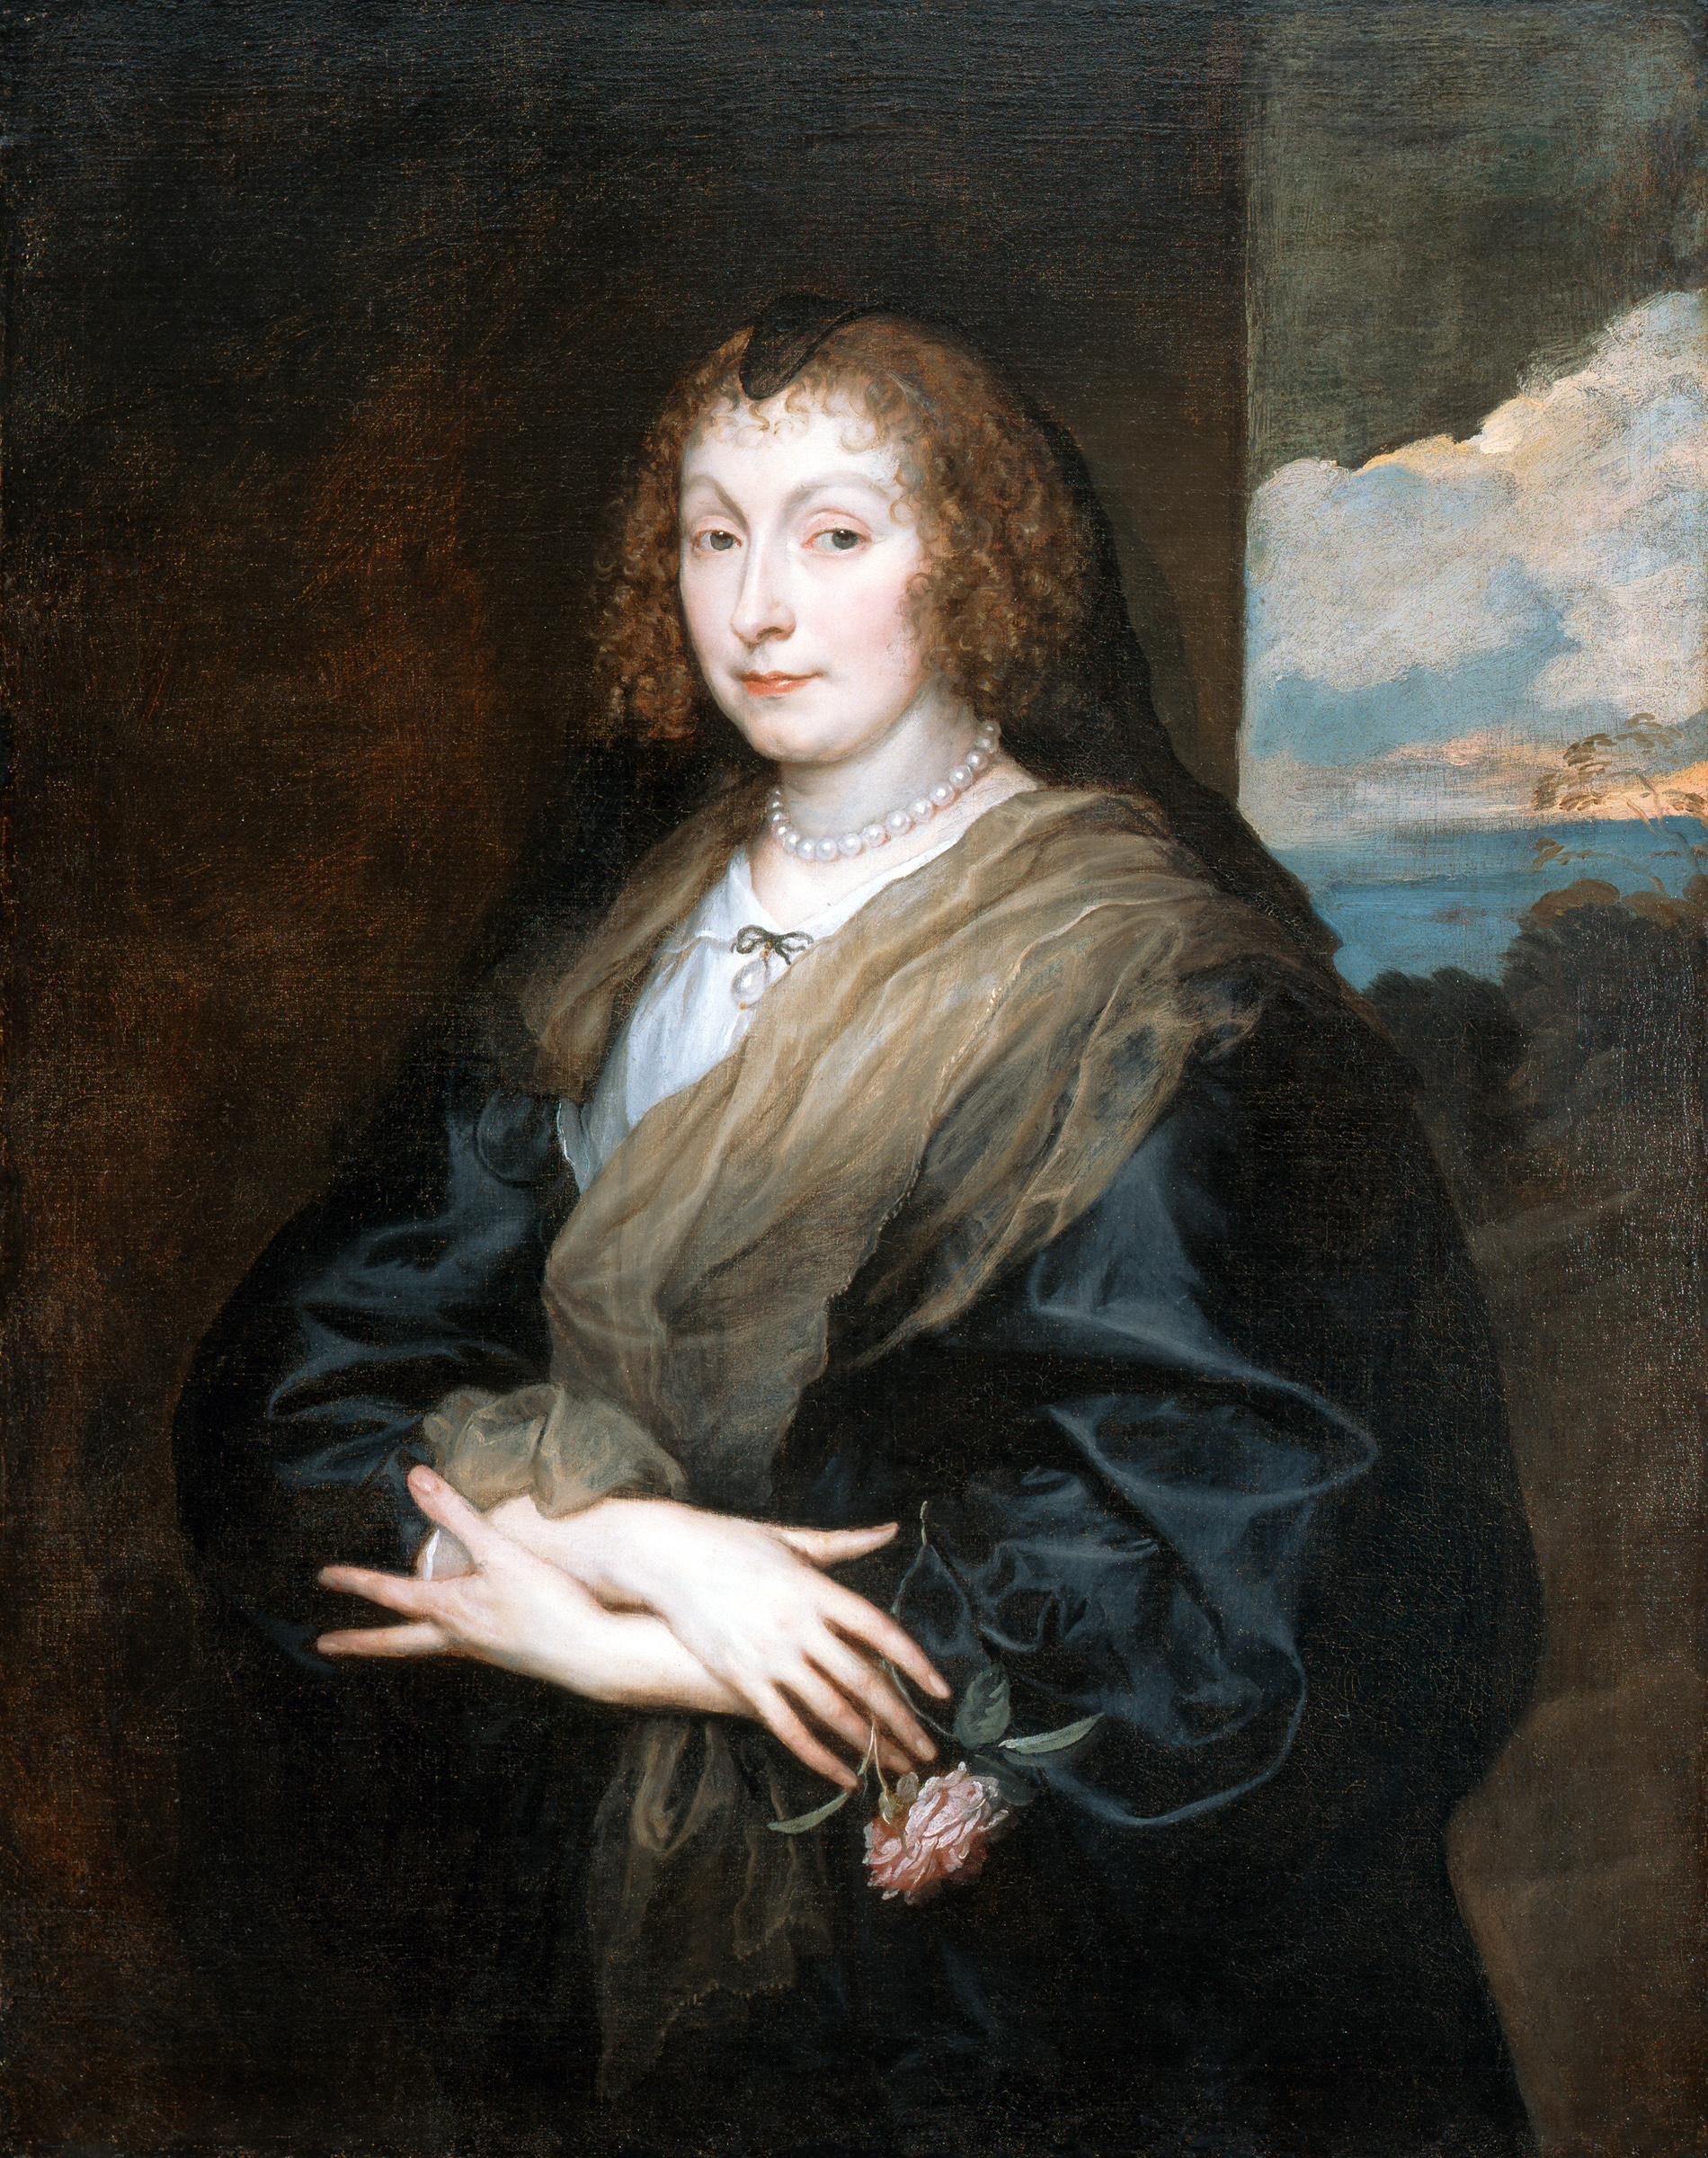 Anthony van Dyck - Portrait of a Woman with a Rose